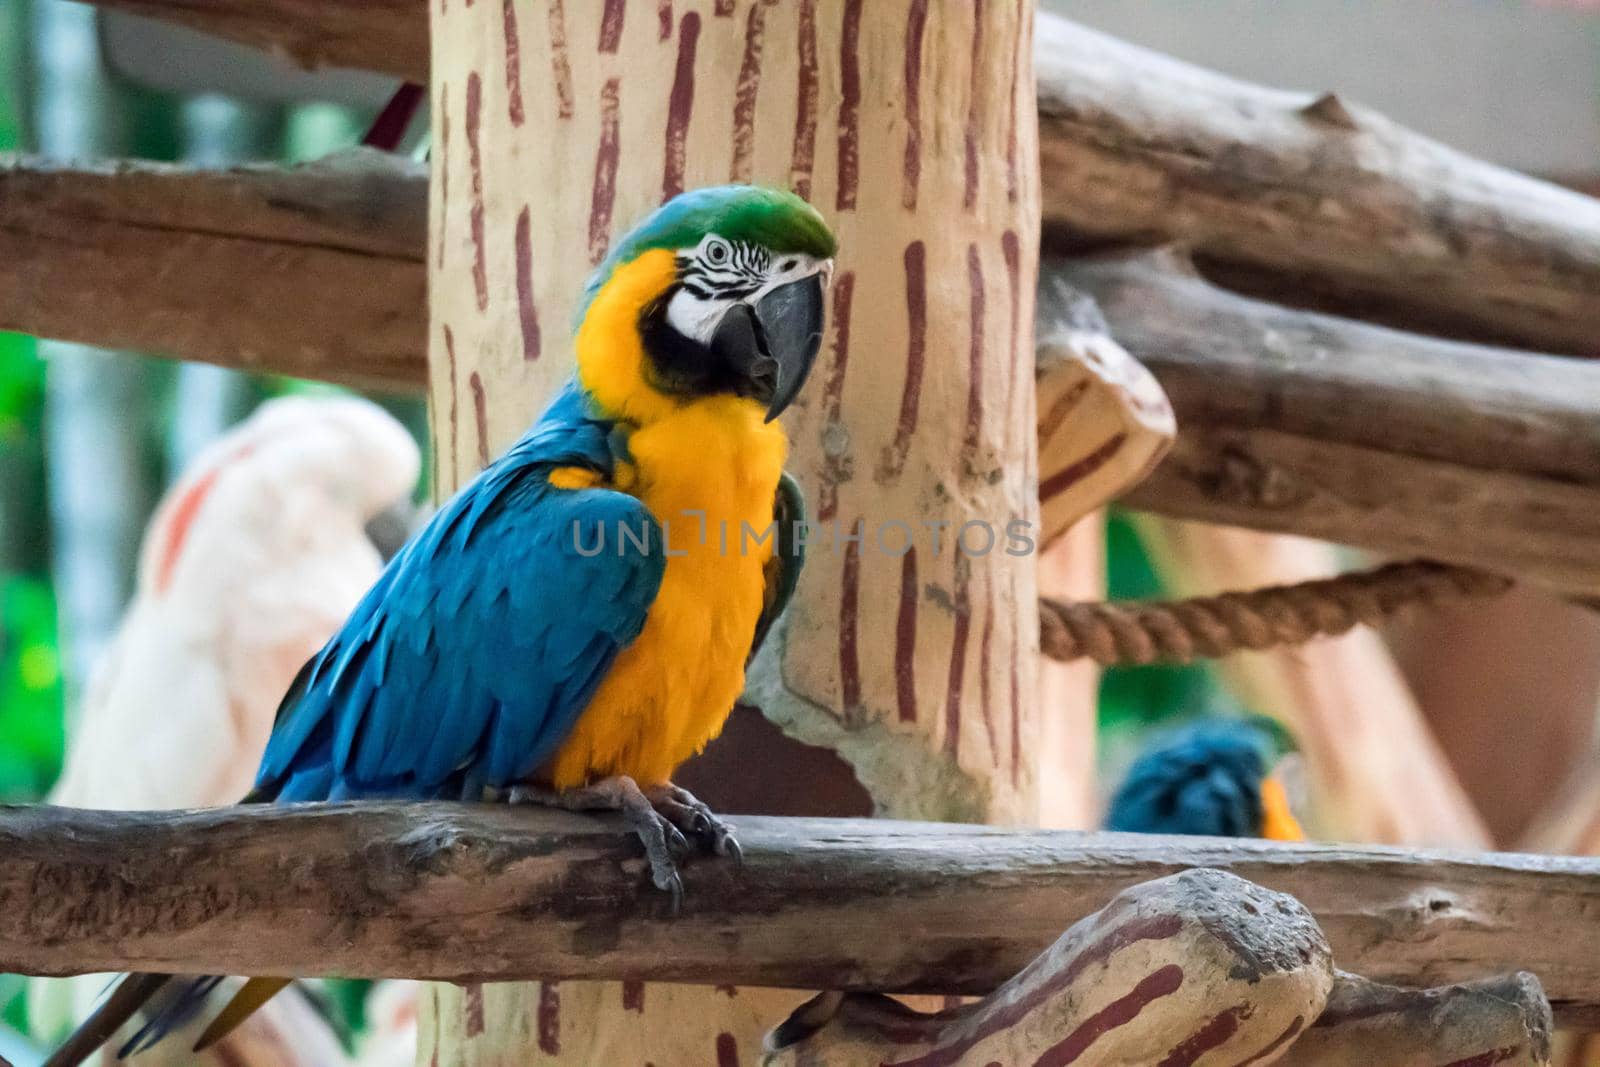 The Blue macaw called Blue throated macaw on perch